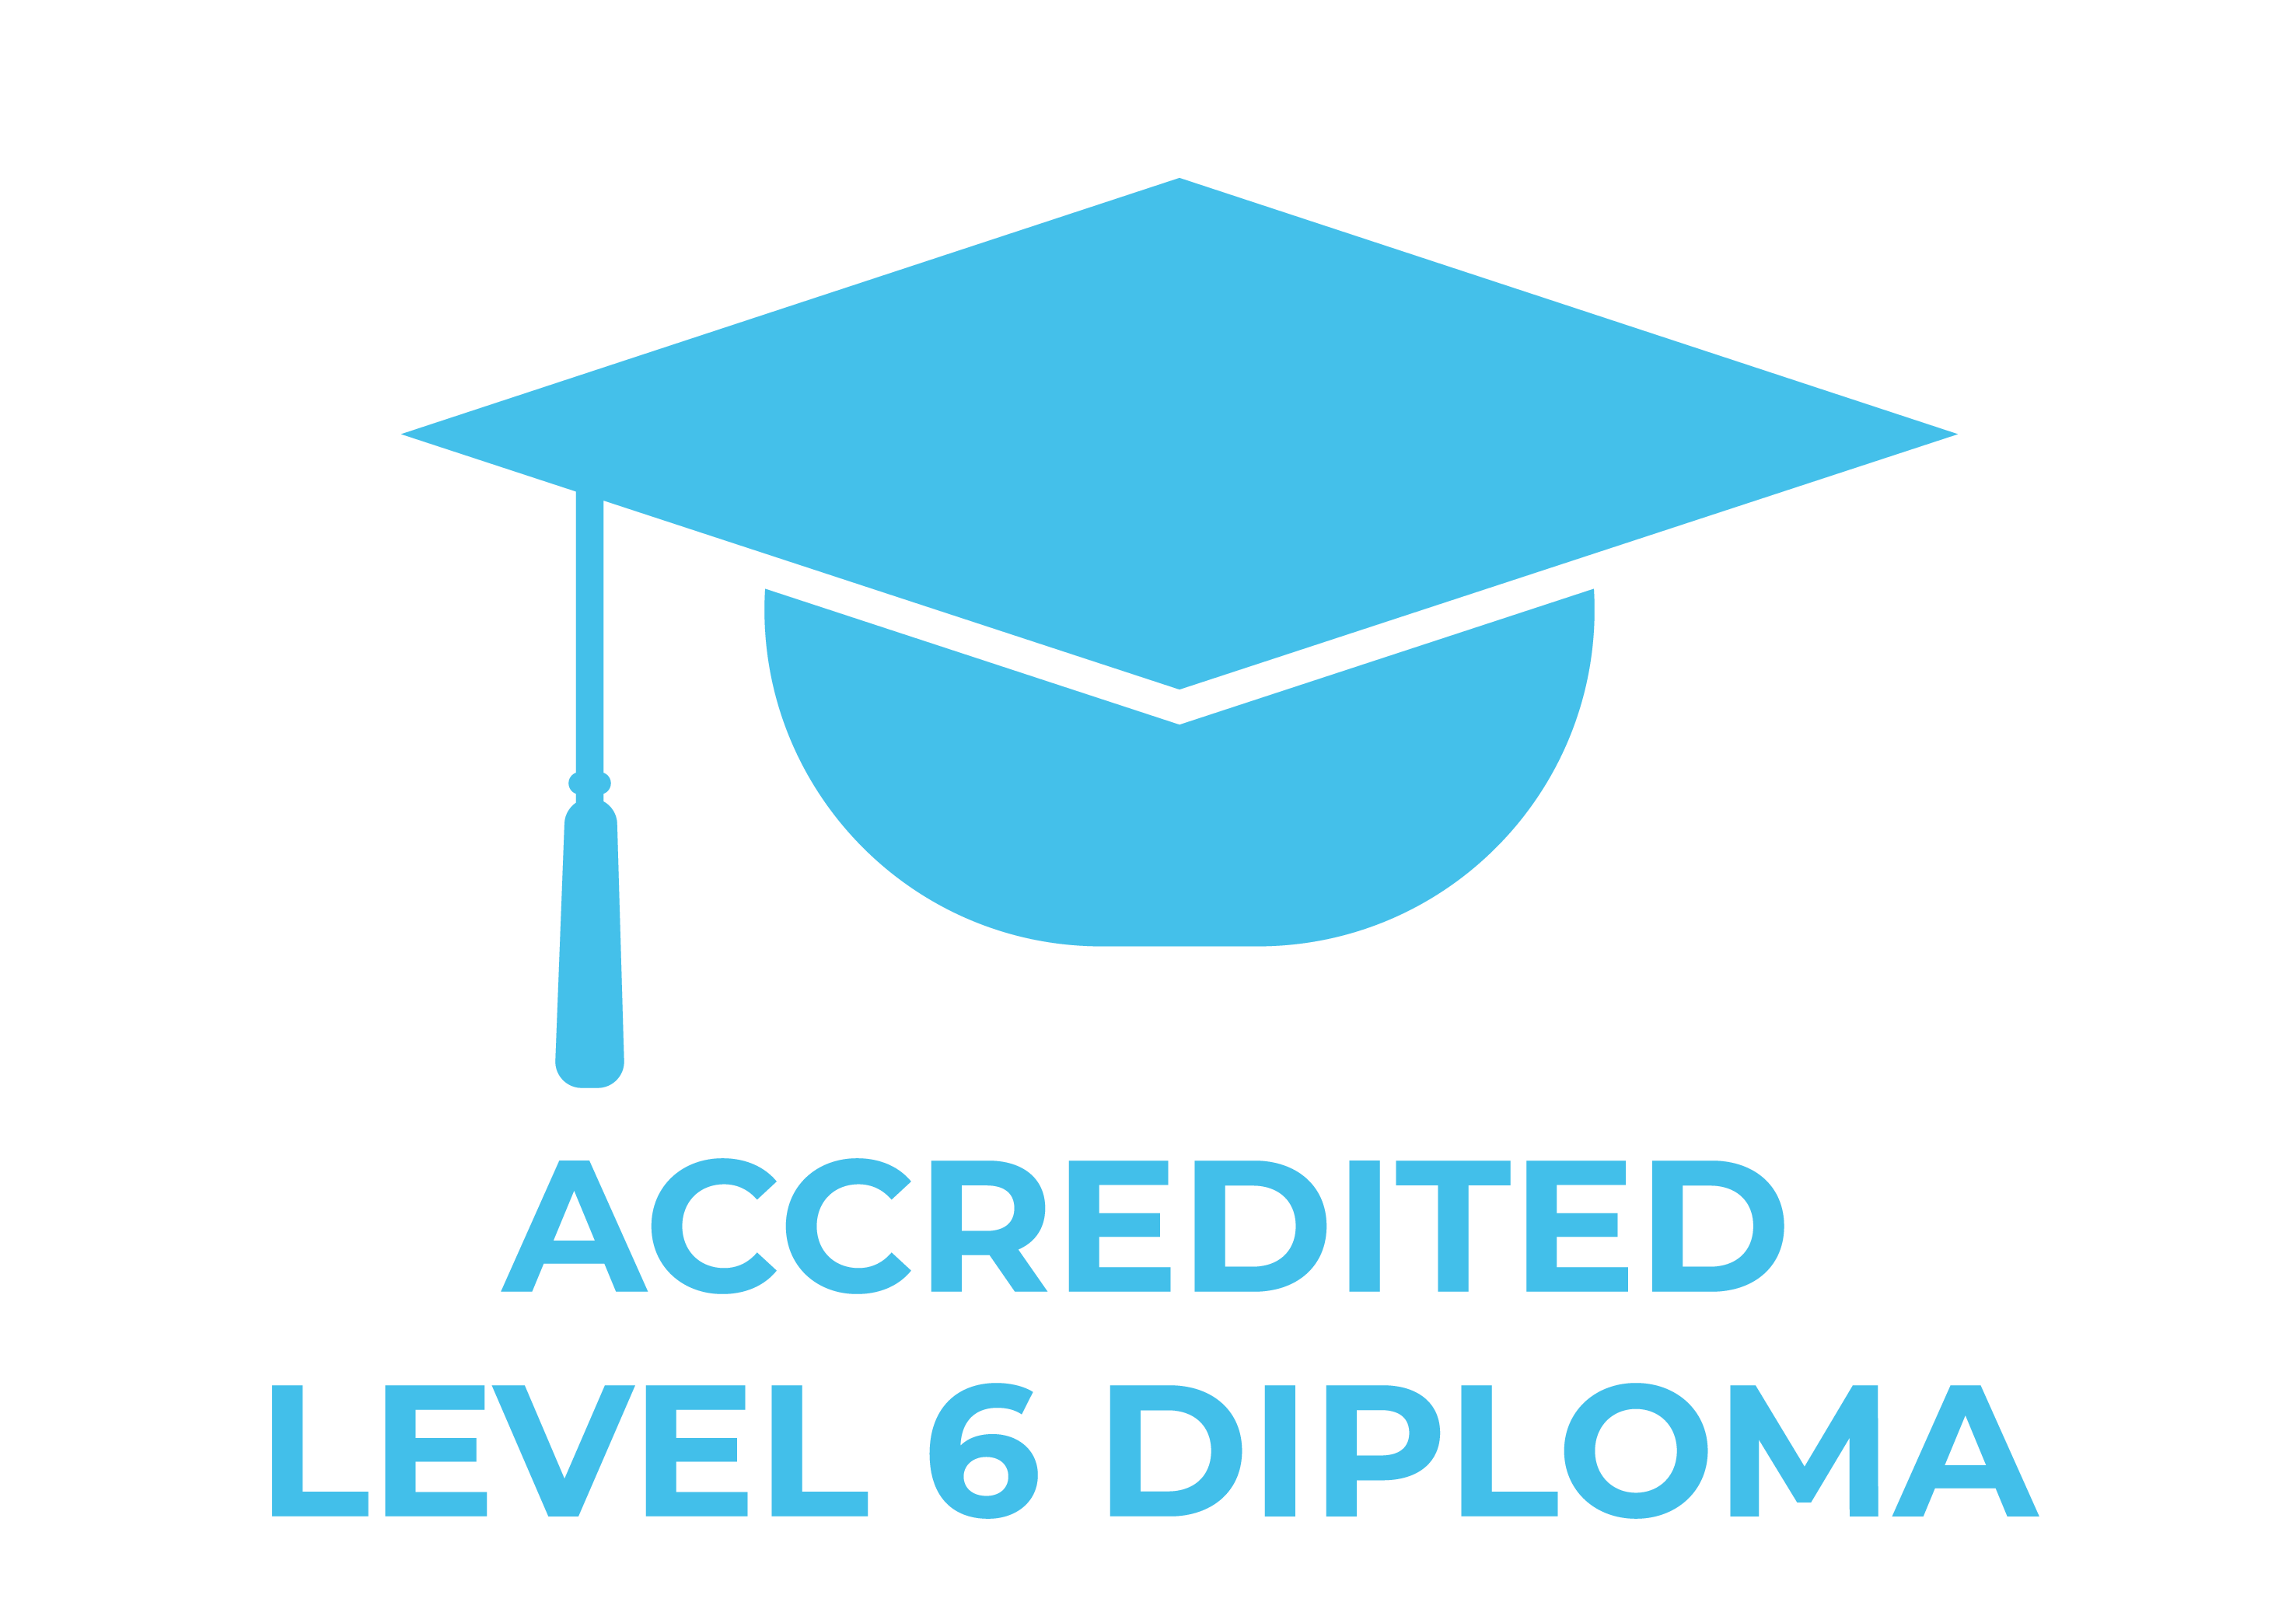 ACCREDITED LEVEL 6 DIPLOMA